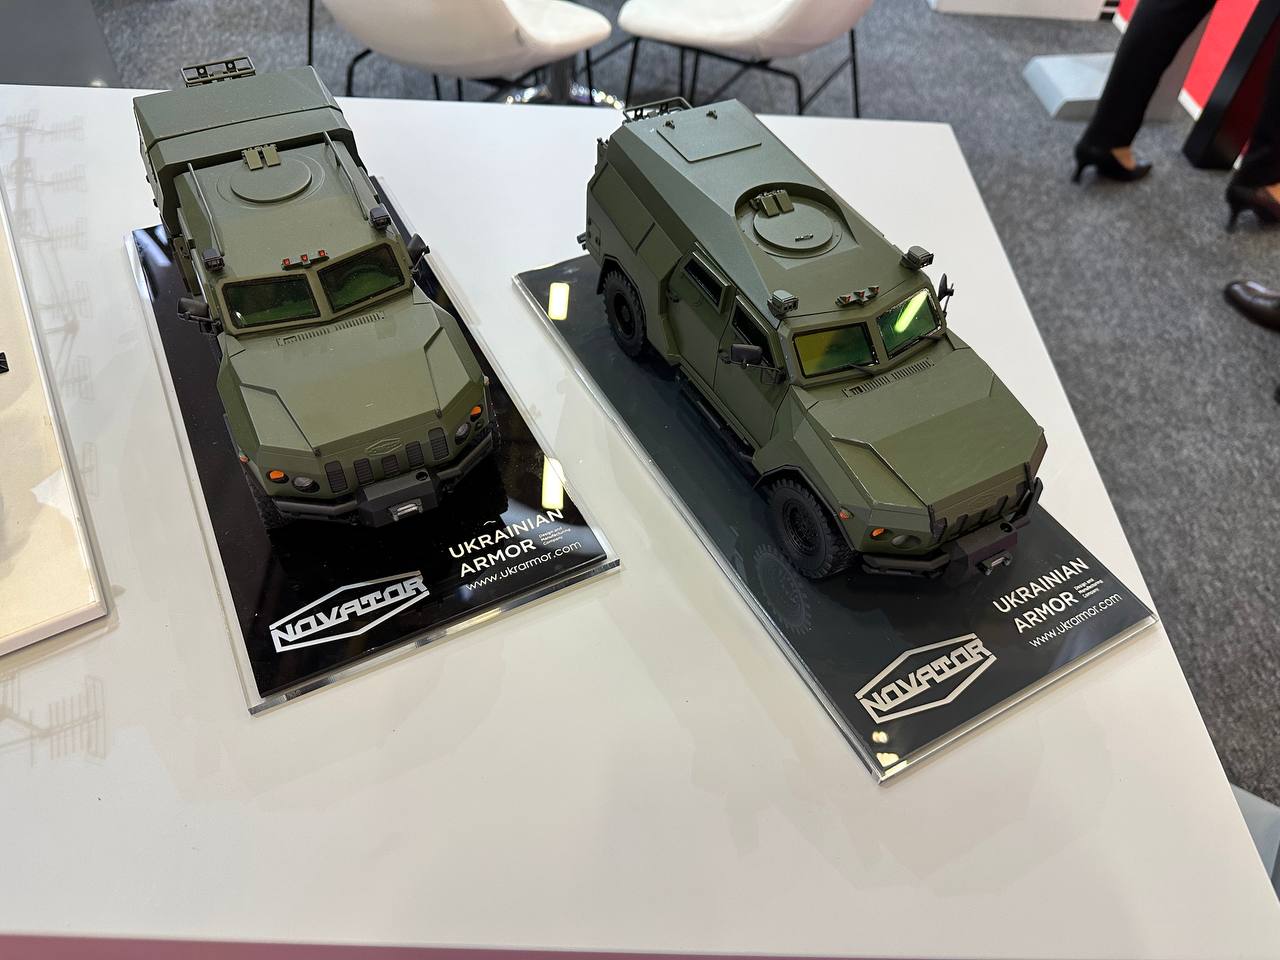 New version of the Novator APC with differenct payloads